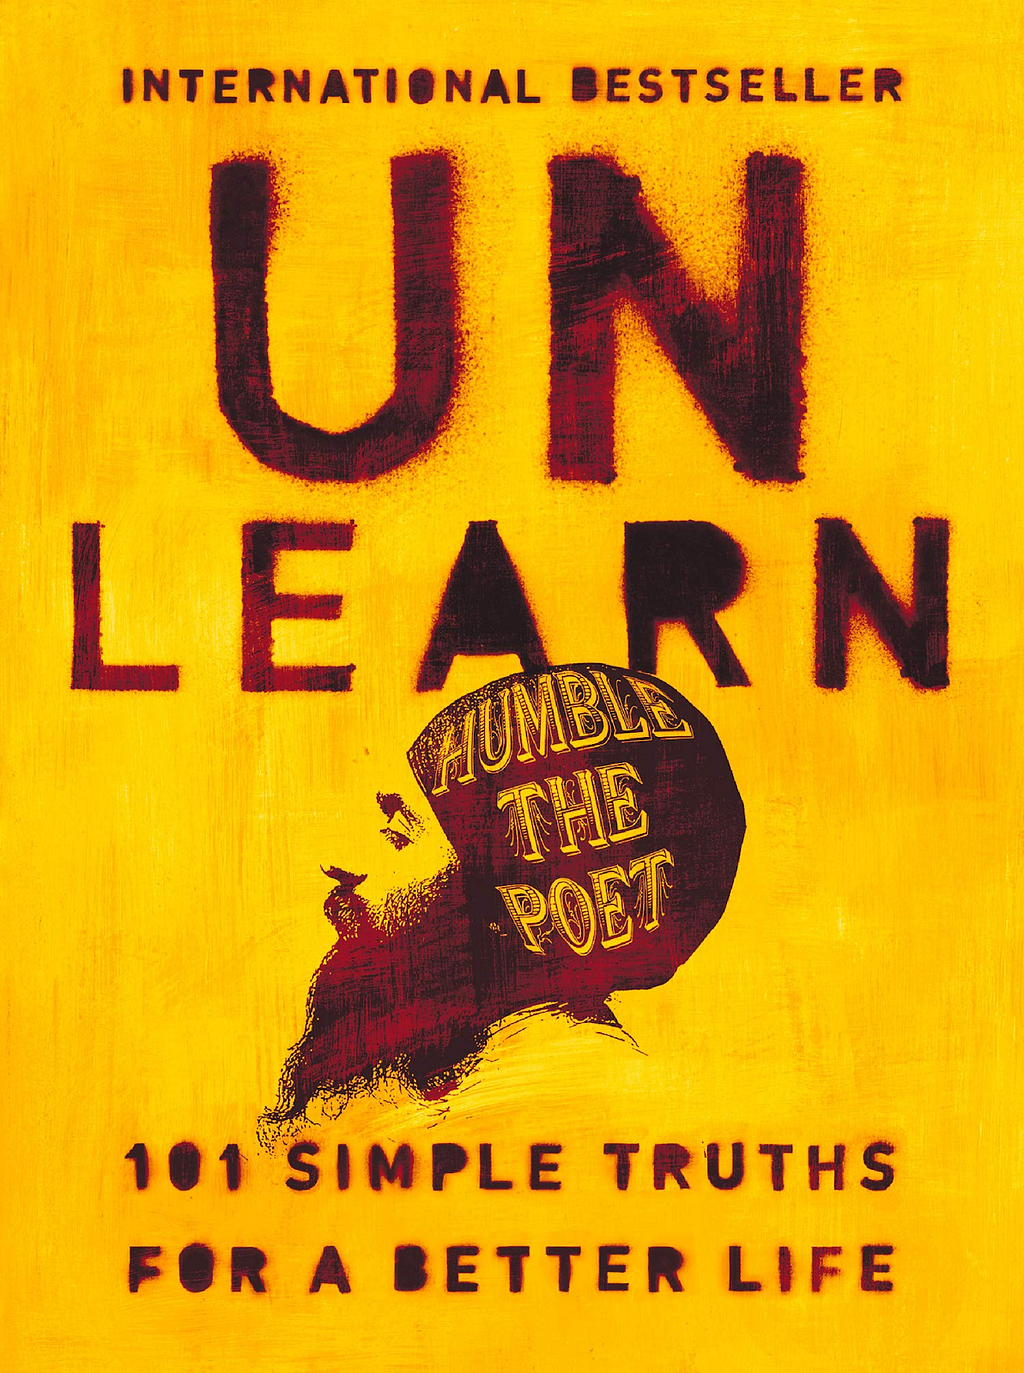 Unlearn: 101 Simple Truths For a Better Life by Kanwer Singh or Humble the Poet